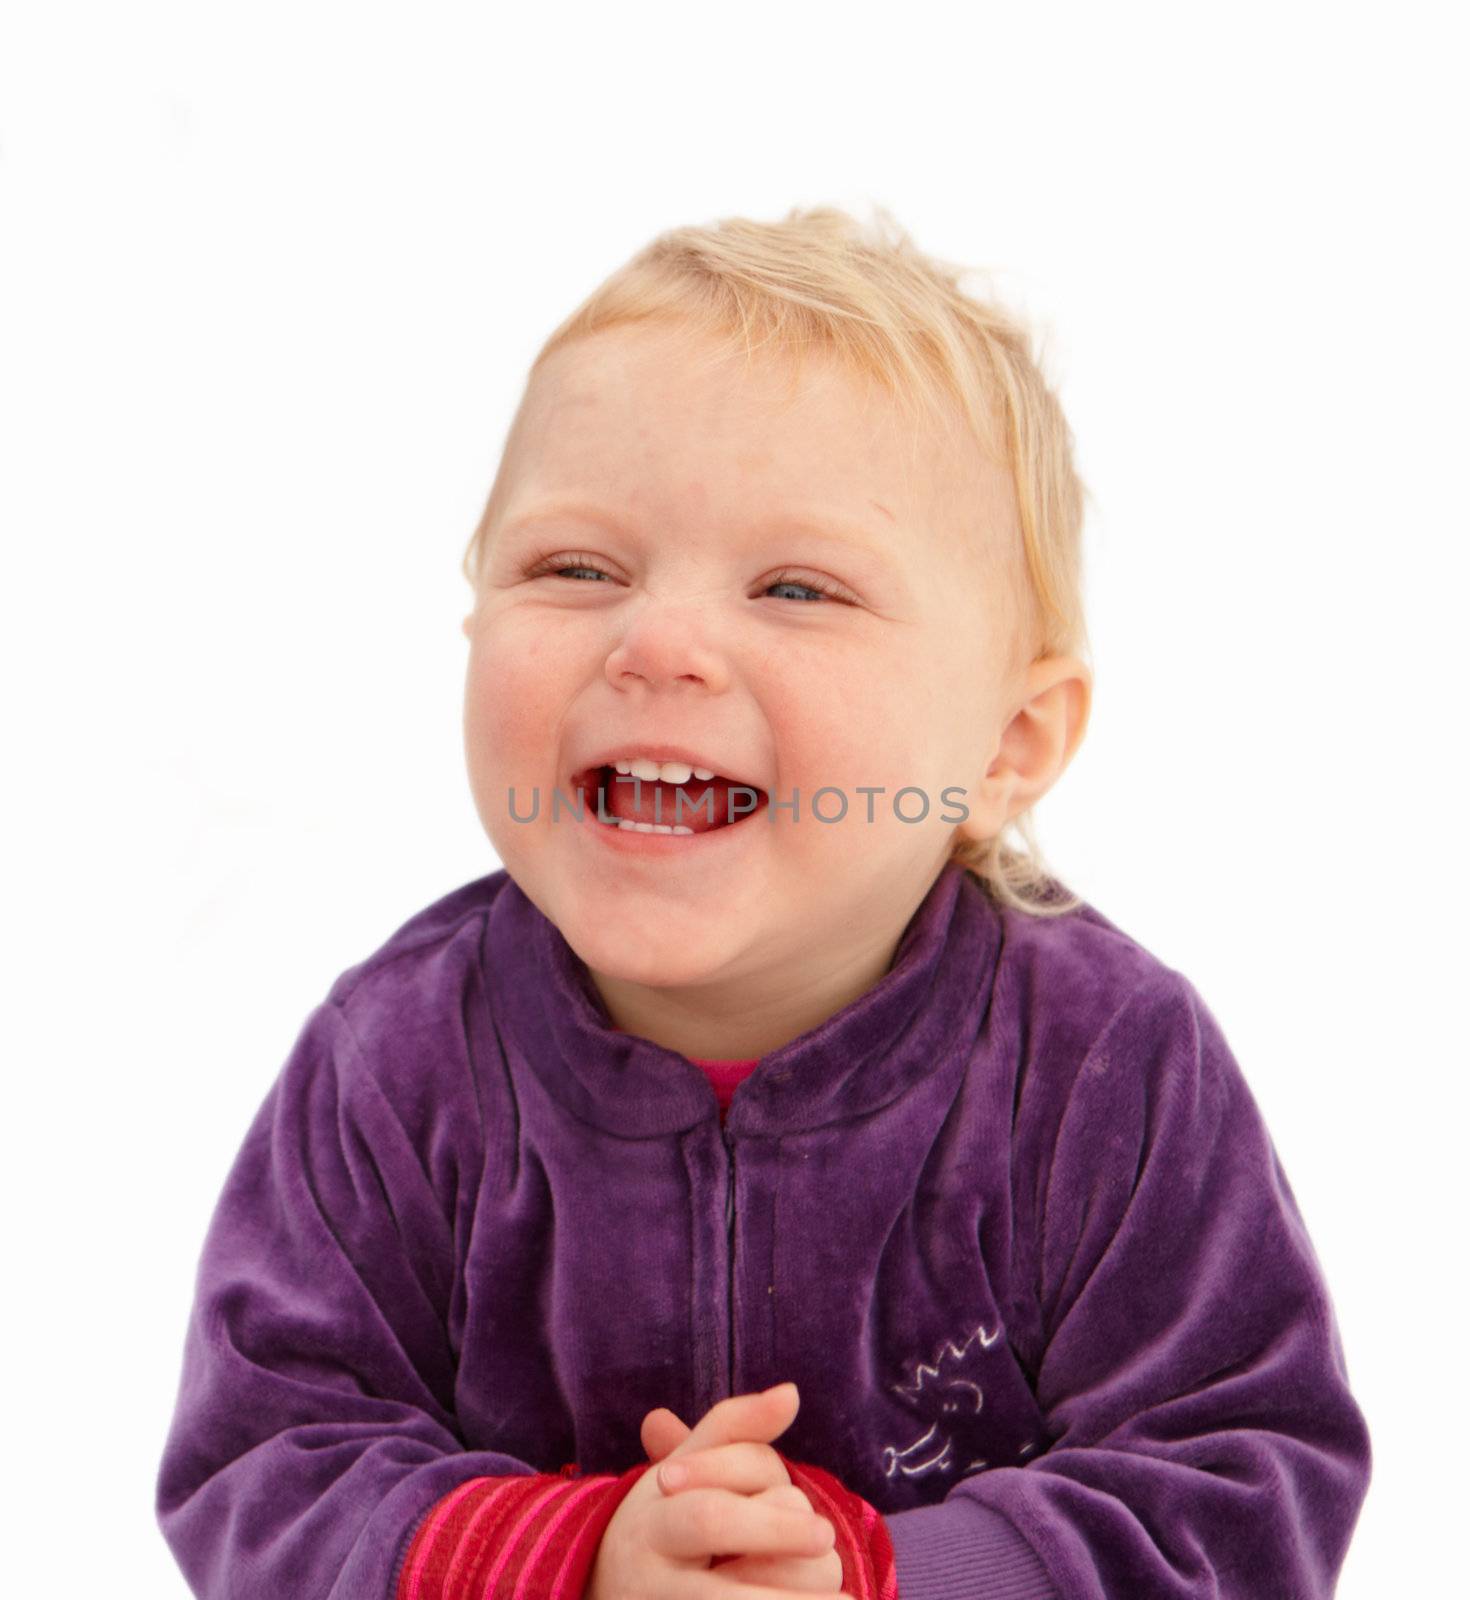 Cute baby girl smiling on white background by FreedomImage